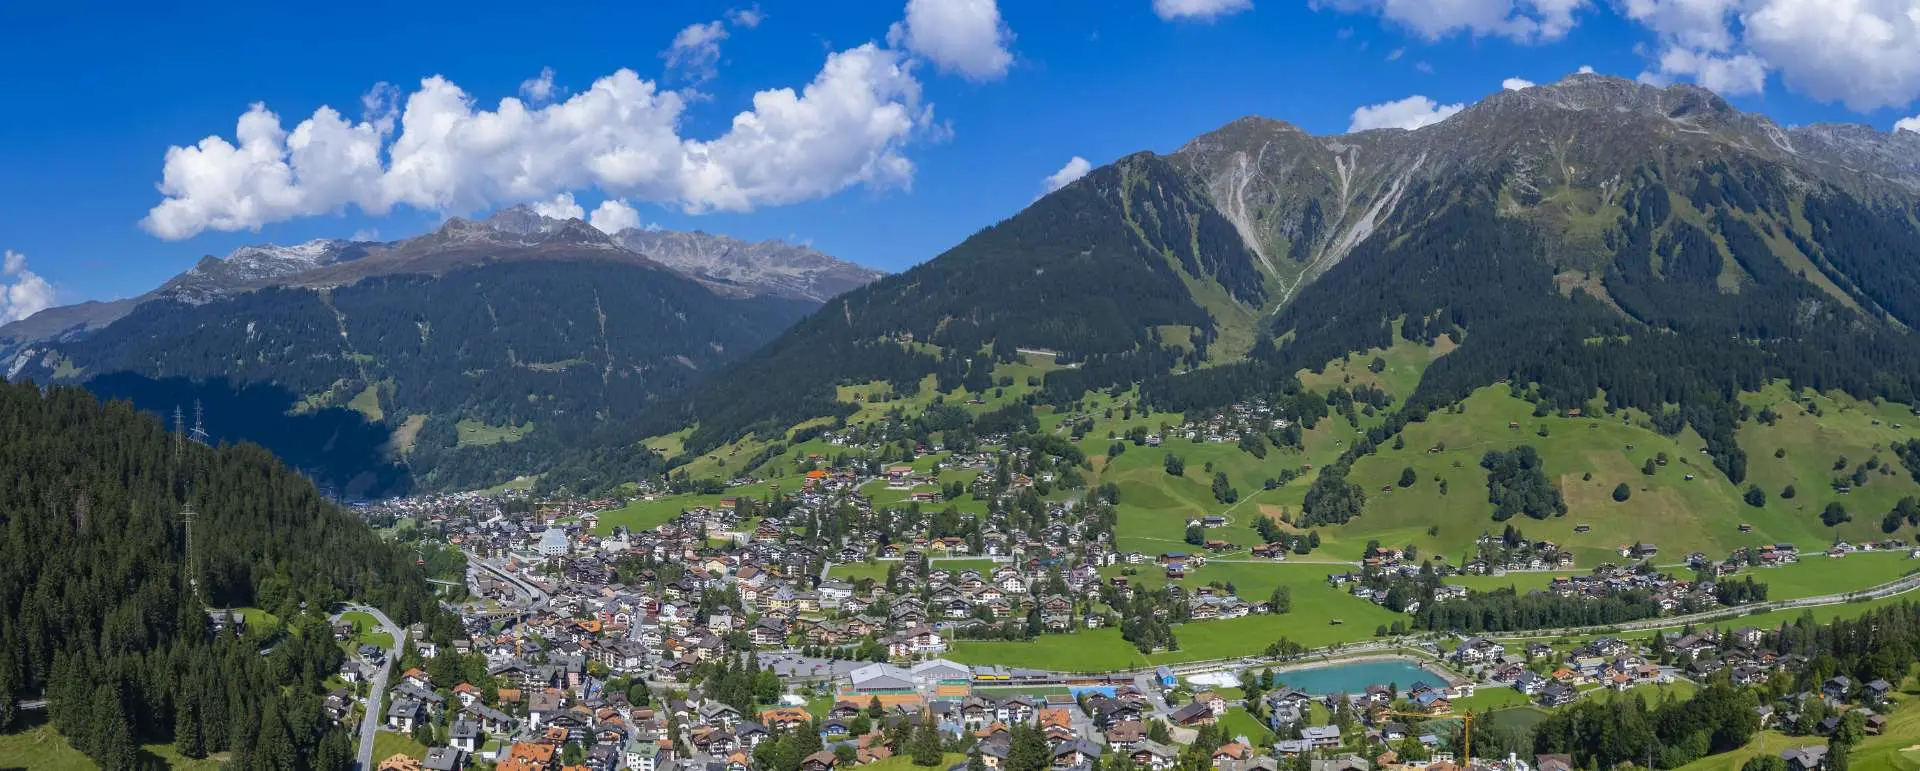 Klosters-Serneus - the destination for groups